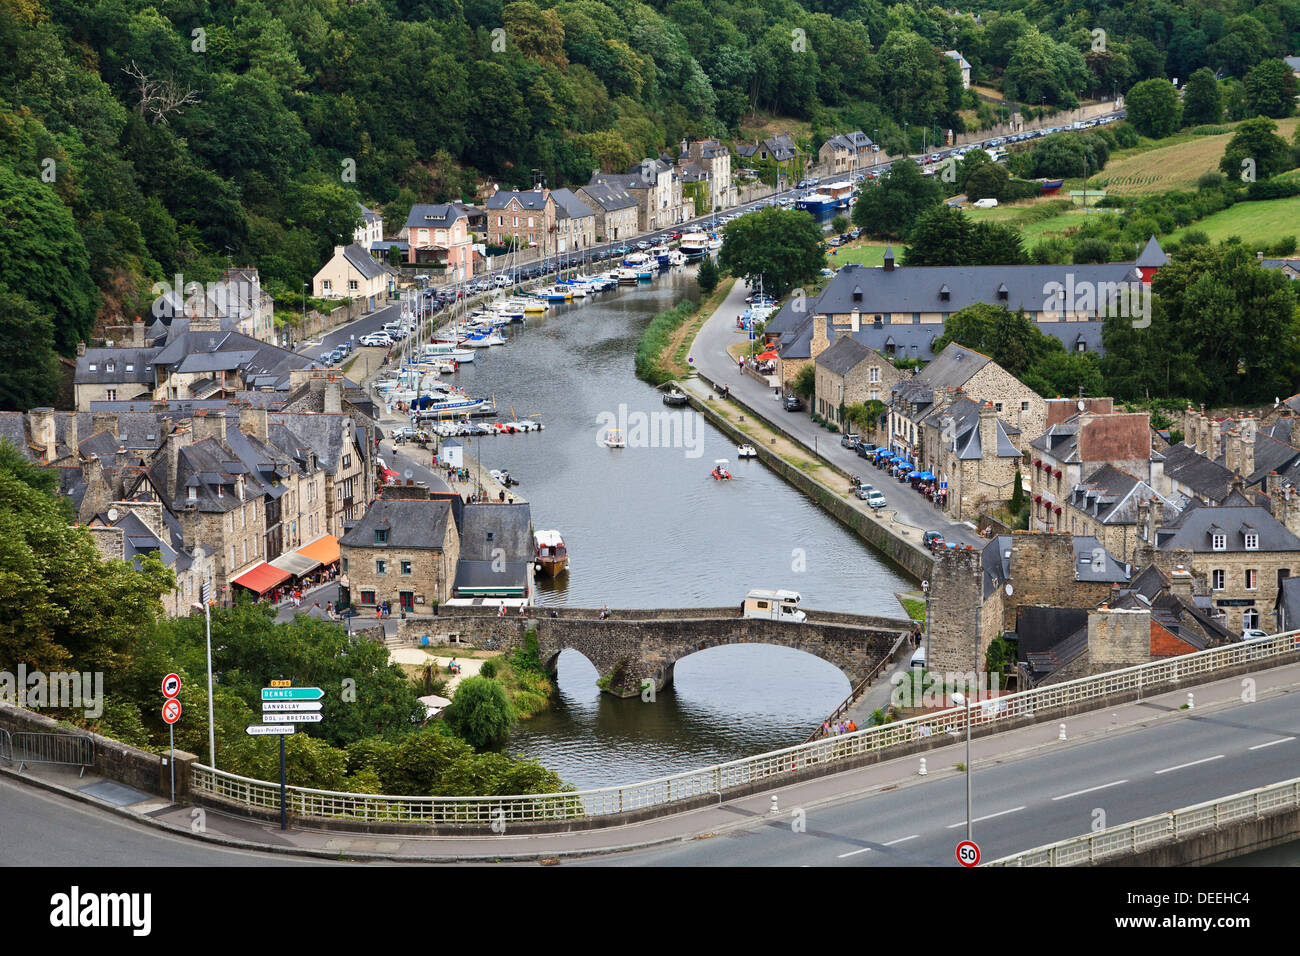 A motorhome crosses the old stone bridge across the River Rance at the Old Port, Dinan, Côtes-d'Armor, Brittany, France Stock Photo